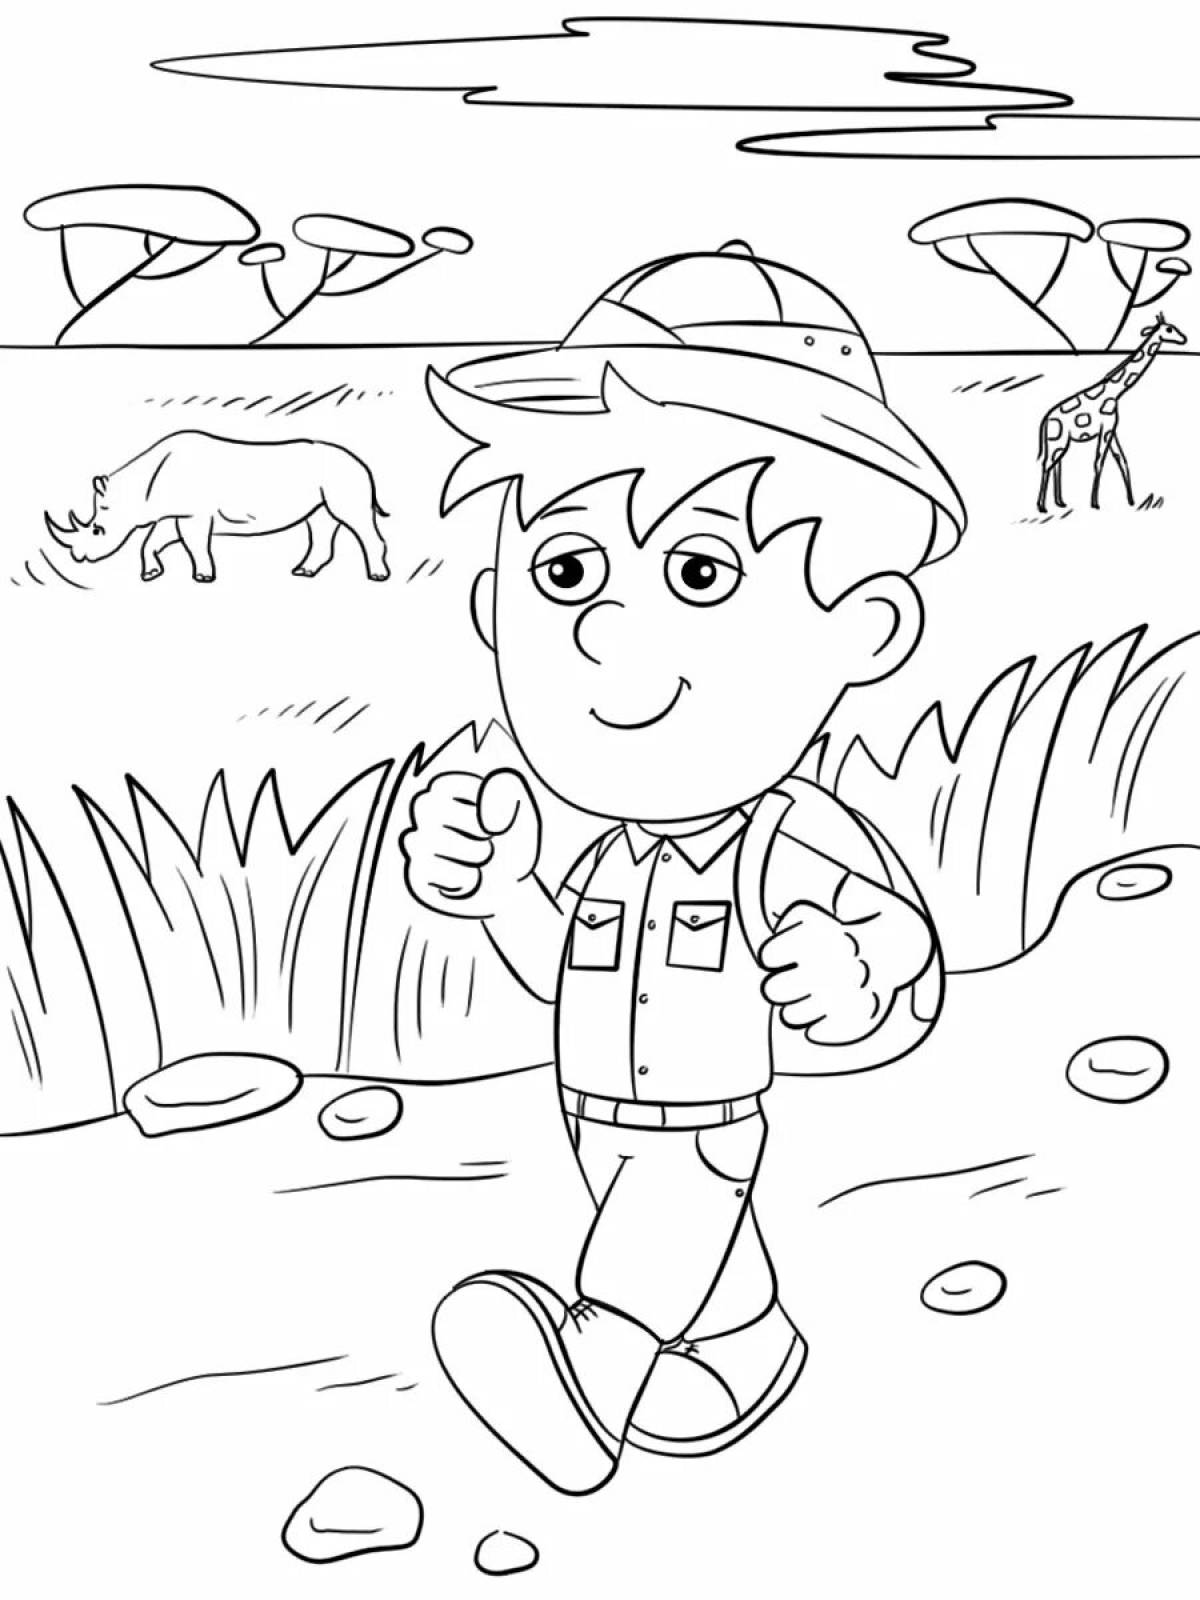 Inspirational tourist coloring page